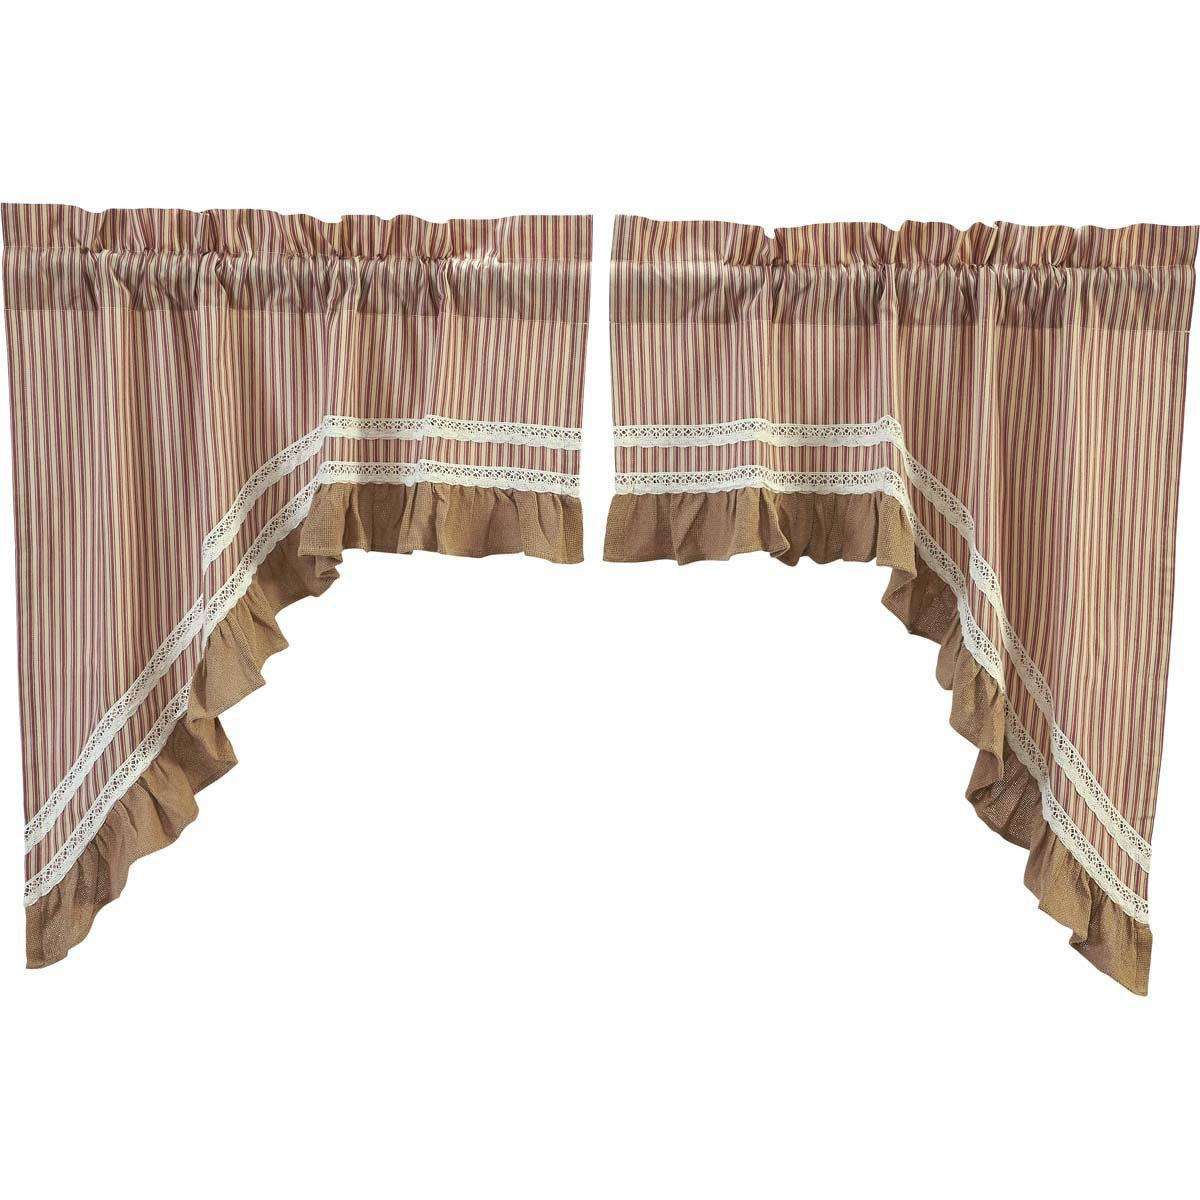 Kendra Stripe Parchment, Brick Red Swag Curtain Set 36" x 36" VHC Brands - The Fox Decor